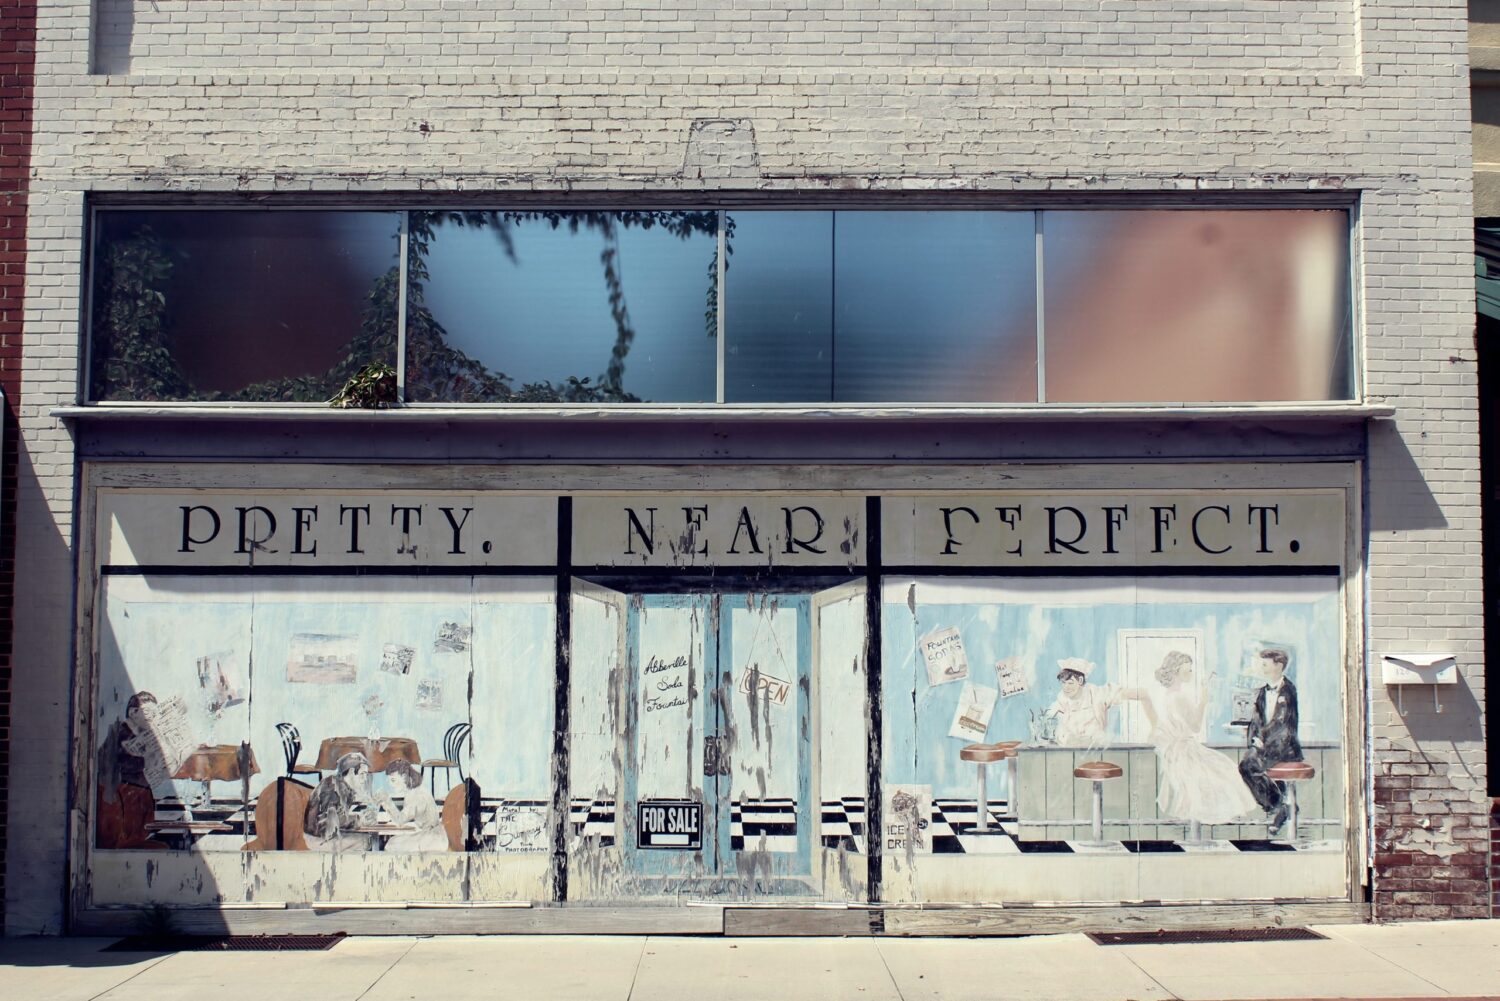 Outside storefront with large windows